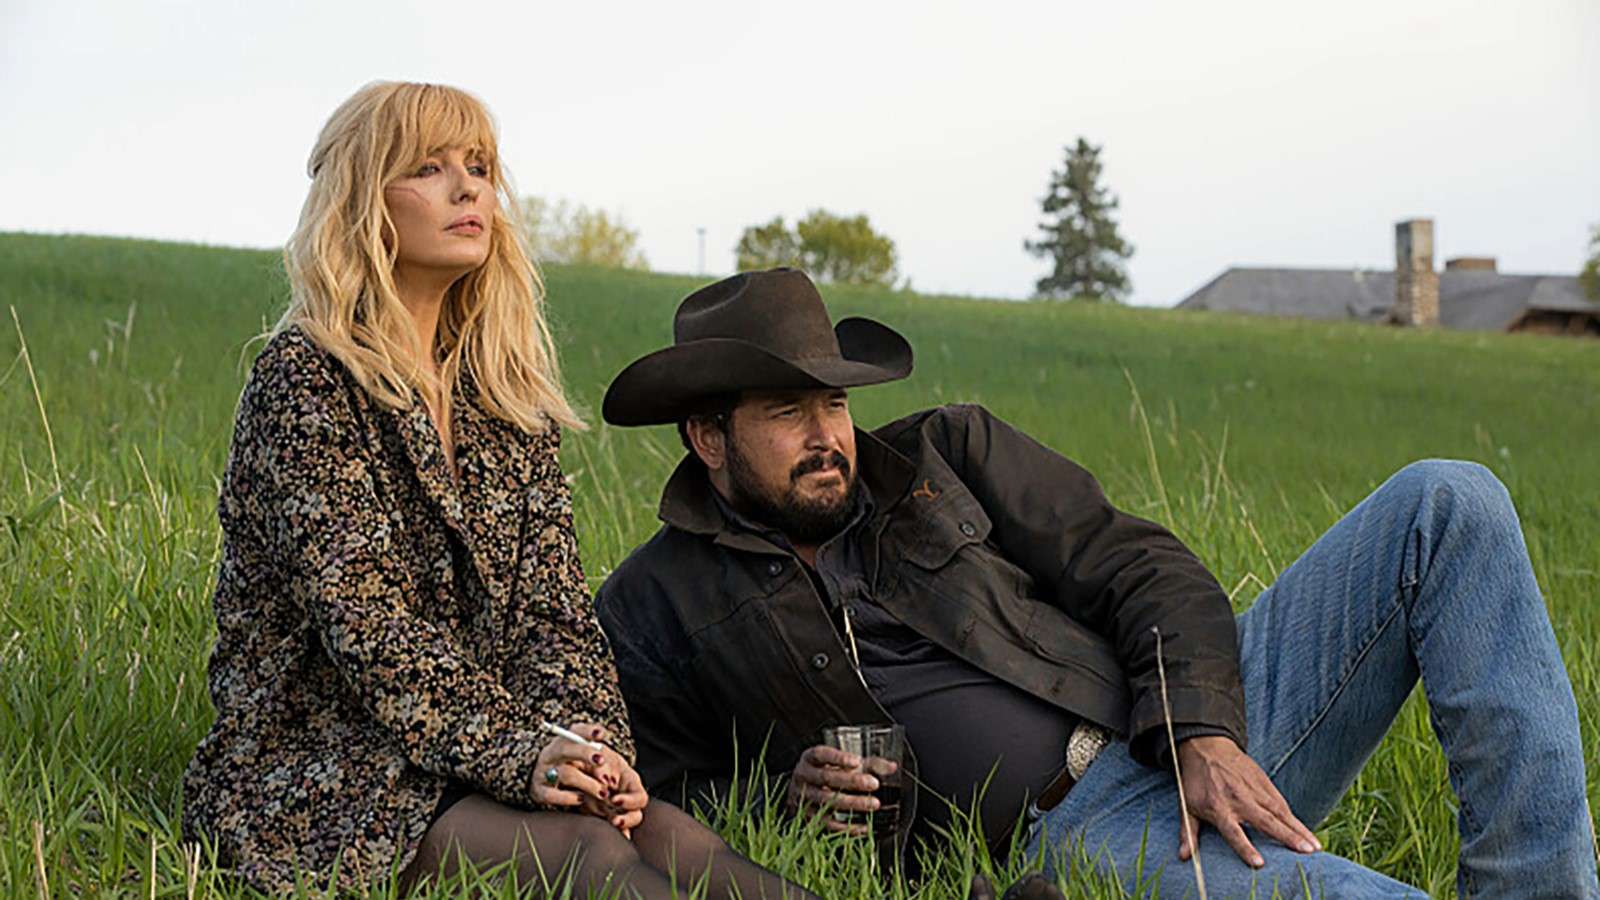 Kelly Reilly and Cole Hauser as Beth and Rip in Yellowstone, laying on the grass